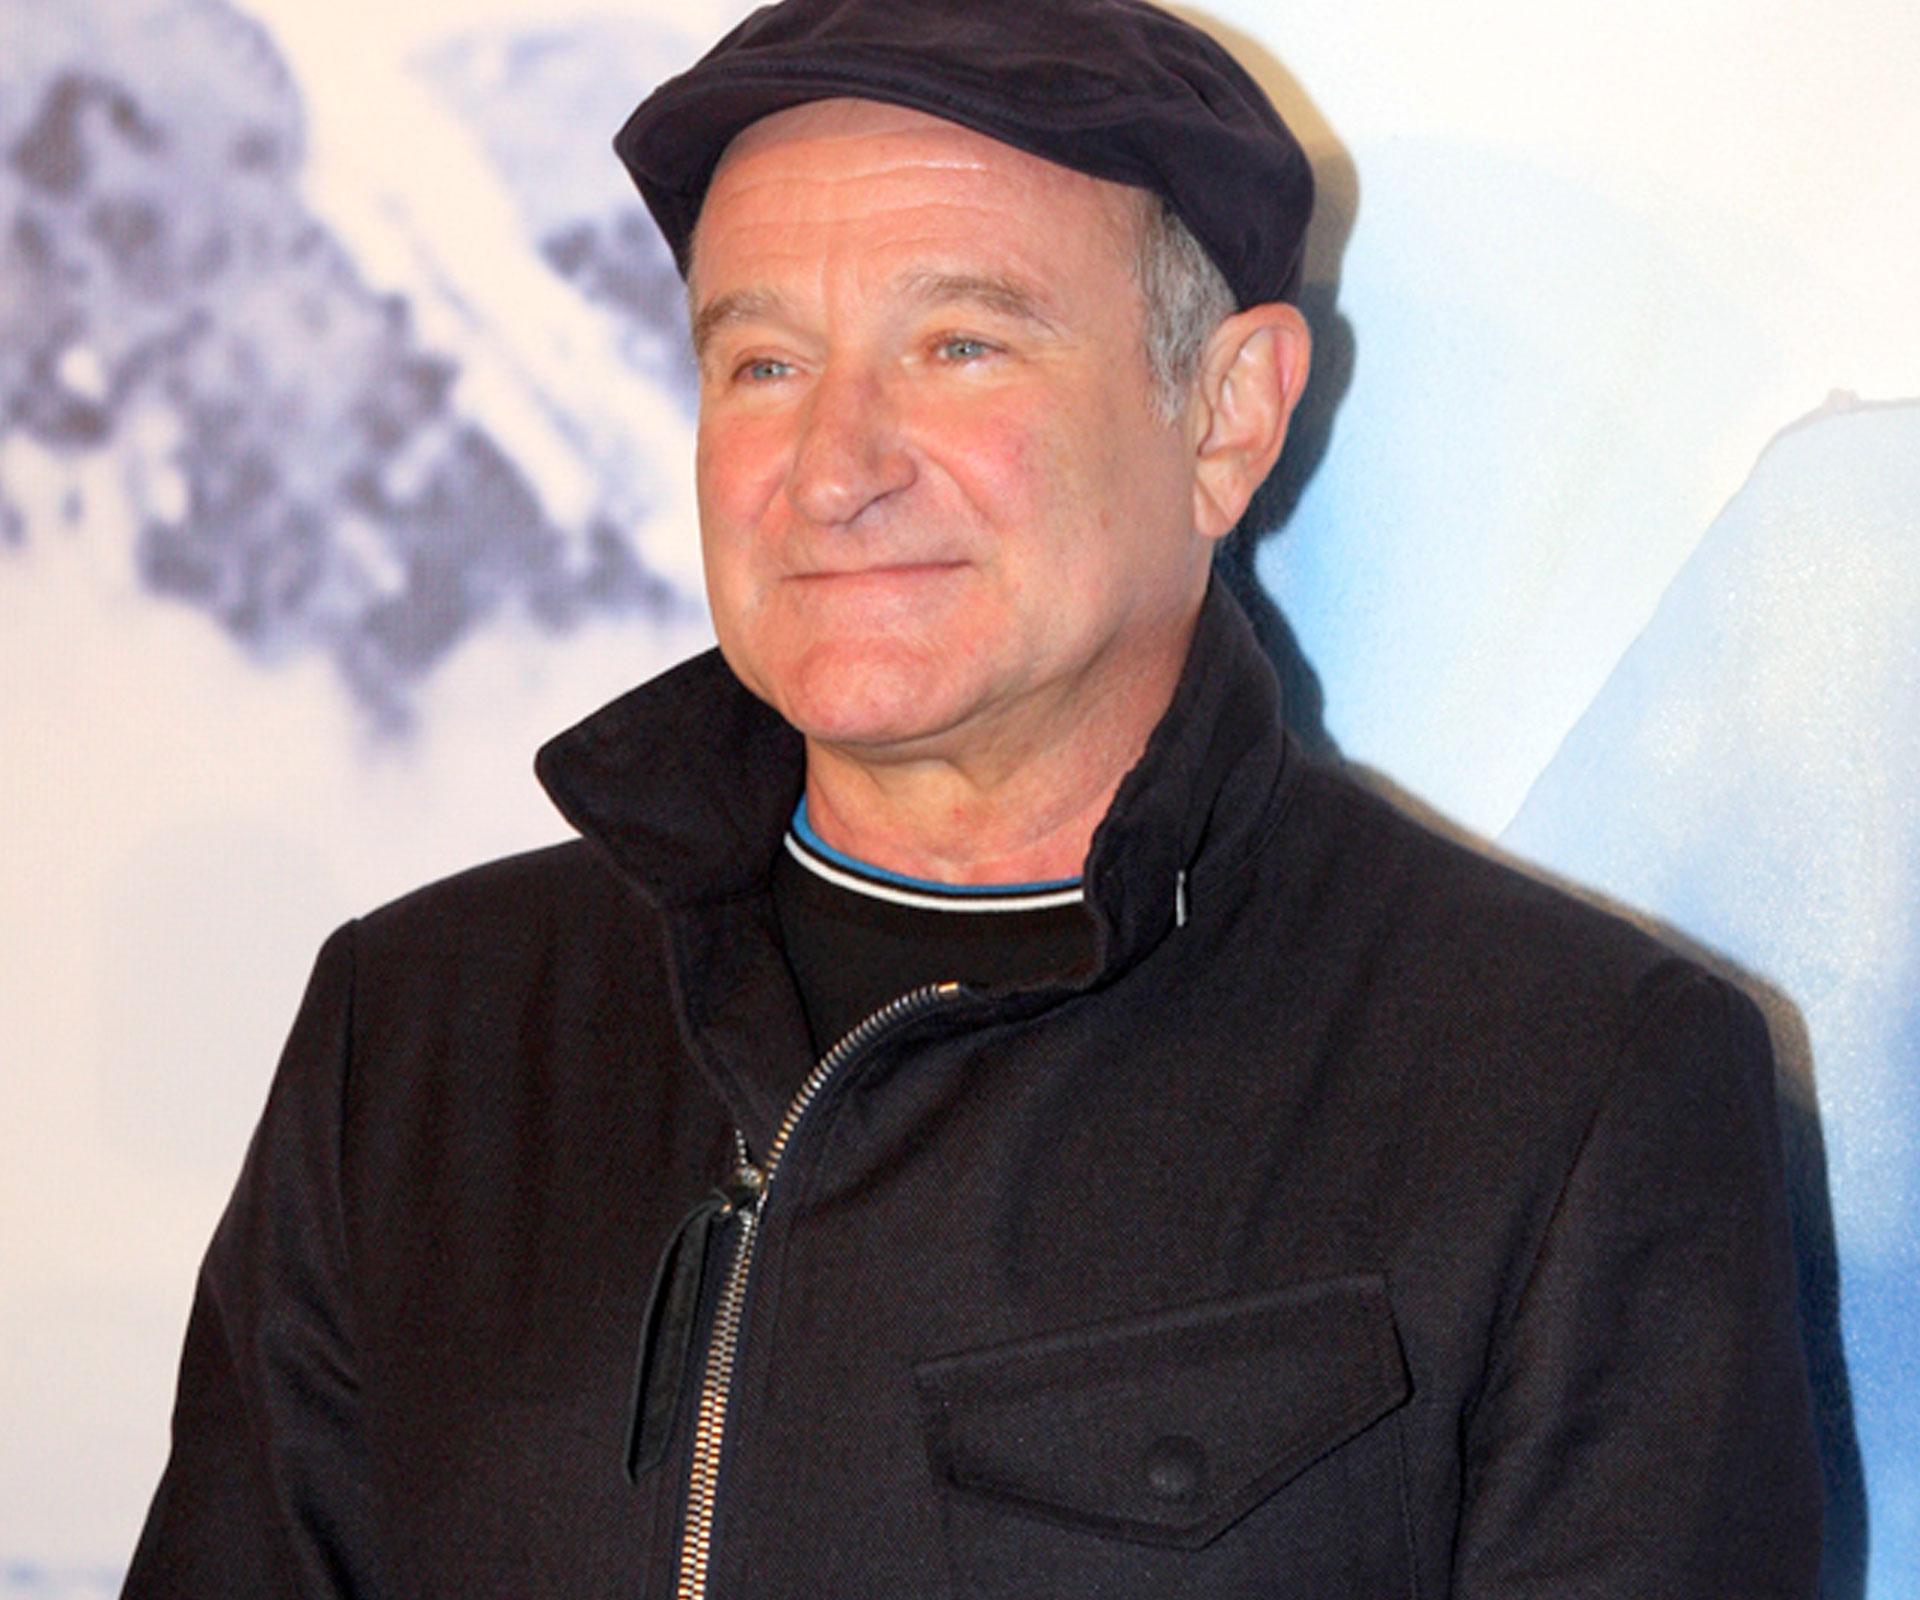 See Robin Williams' final performance in the 'Boulevard' trailer